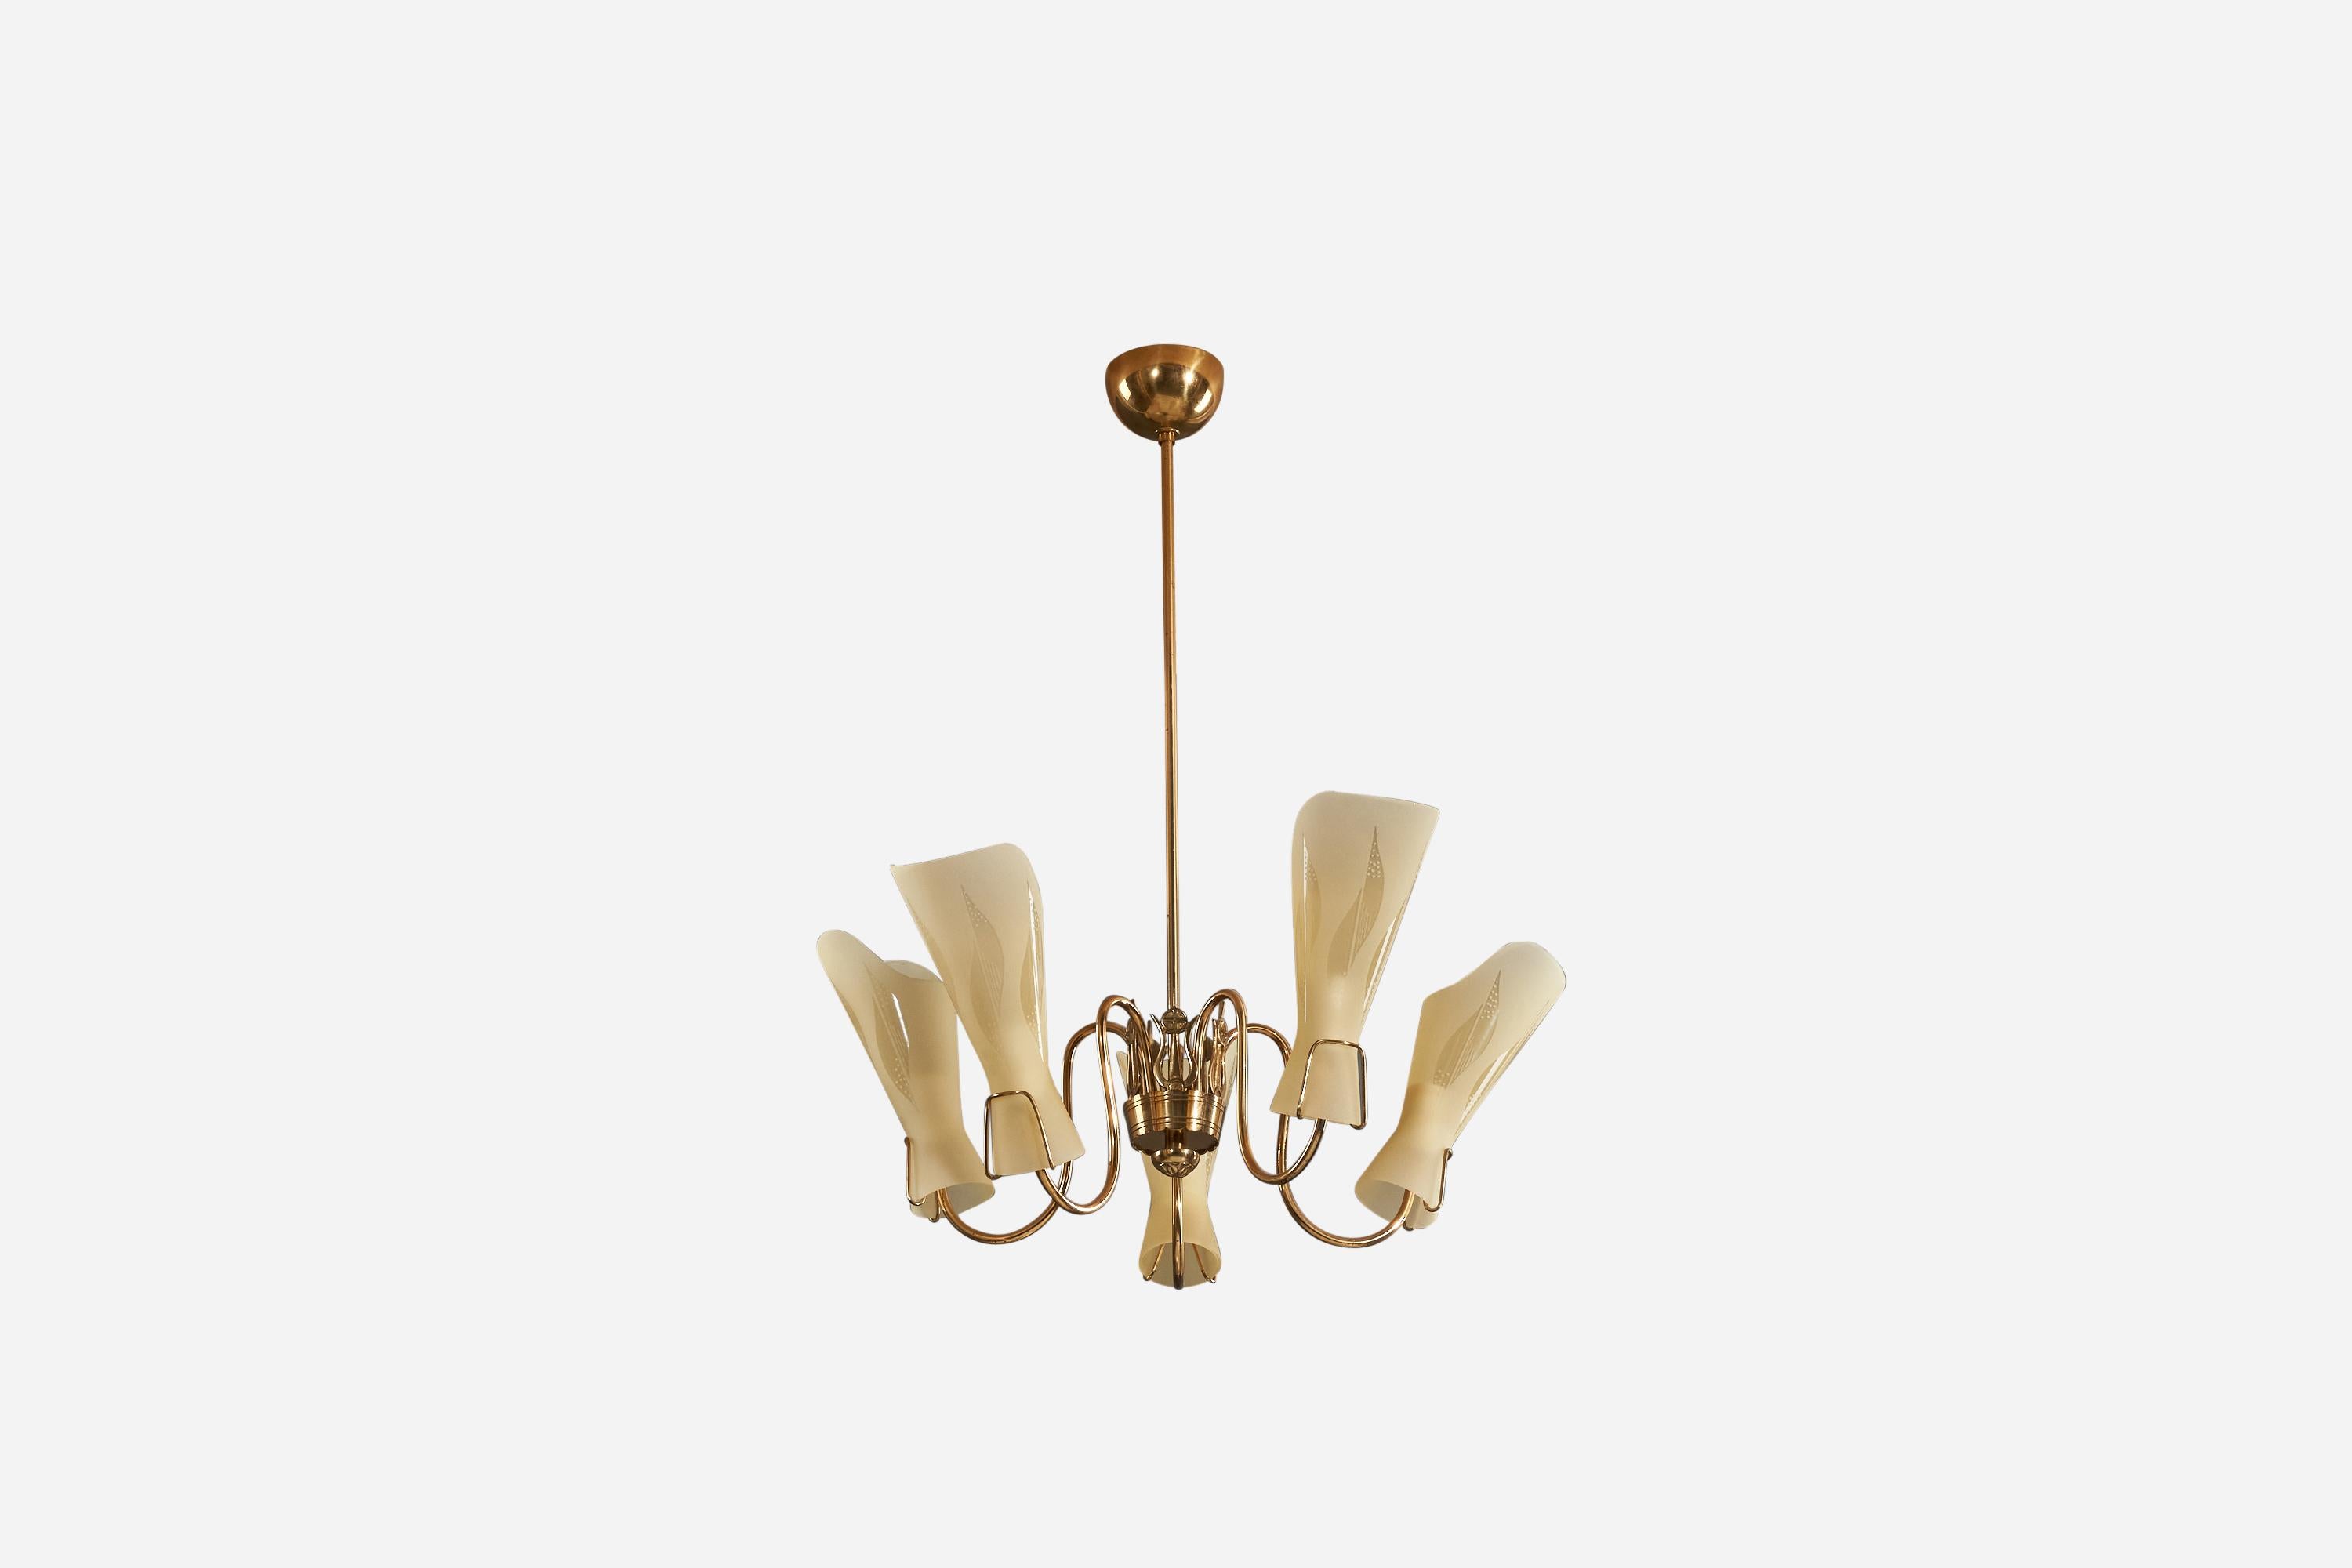 A five-armed, brass and glass chandelier designed and produced by a Swedish designer, Sweden, 1950s.

Canopy Dimensions (inches)
2.5 x 4 x 4 (H x W x D).